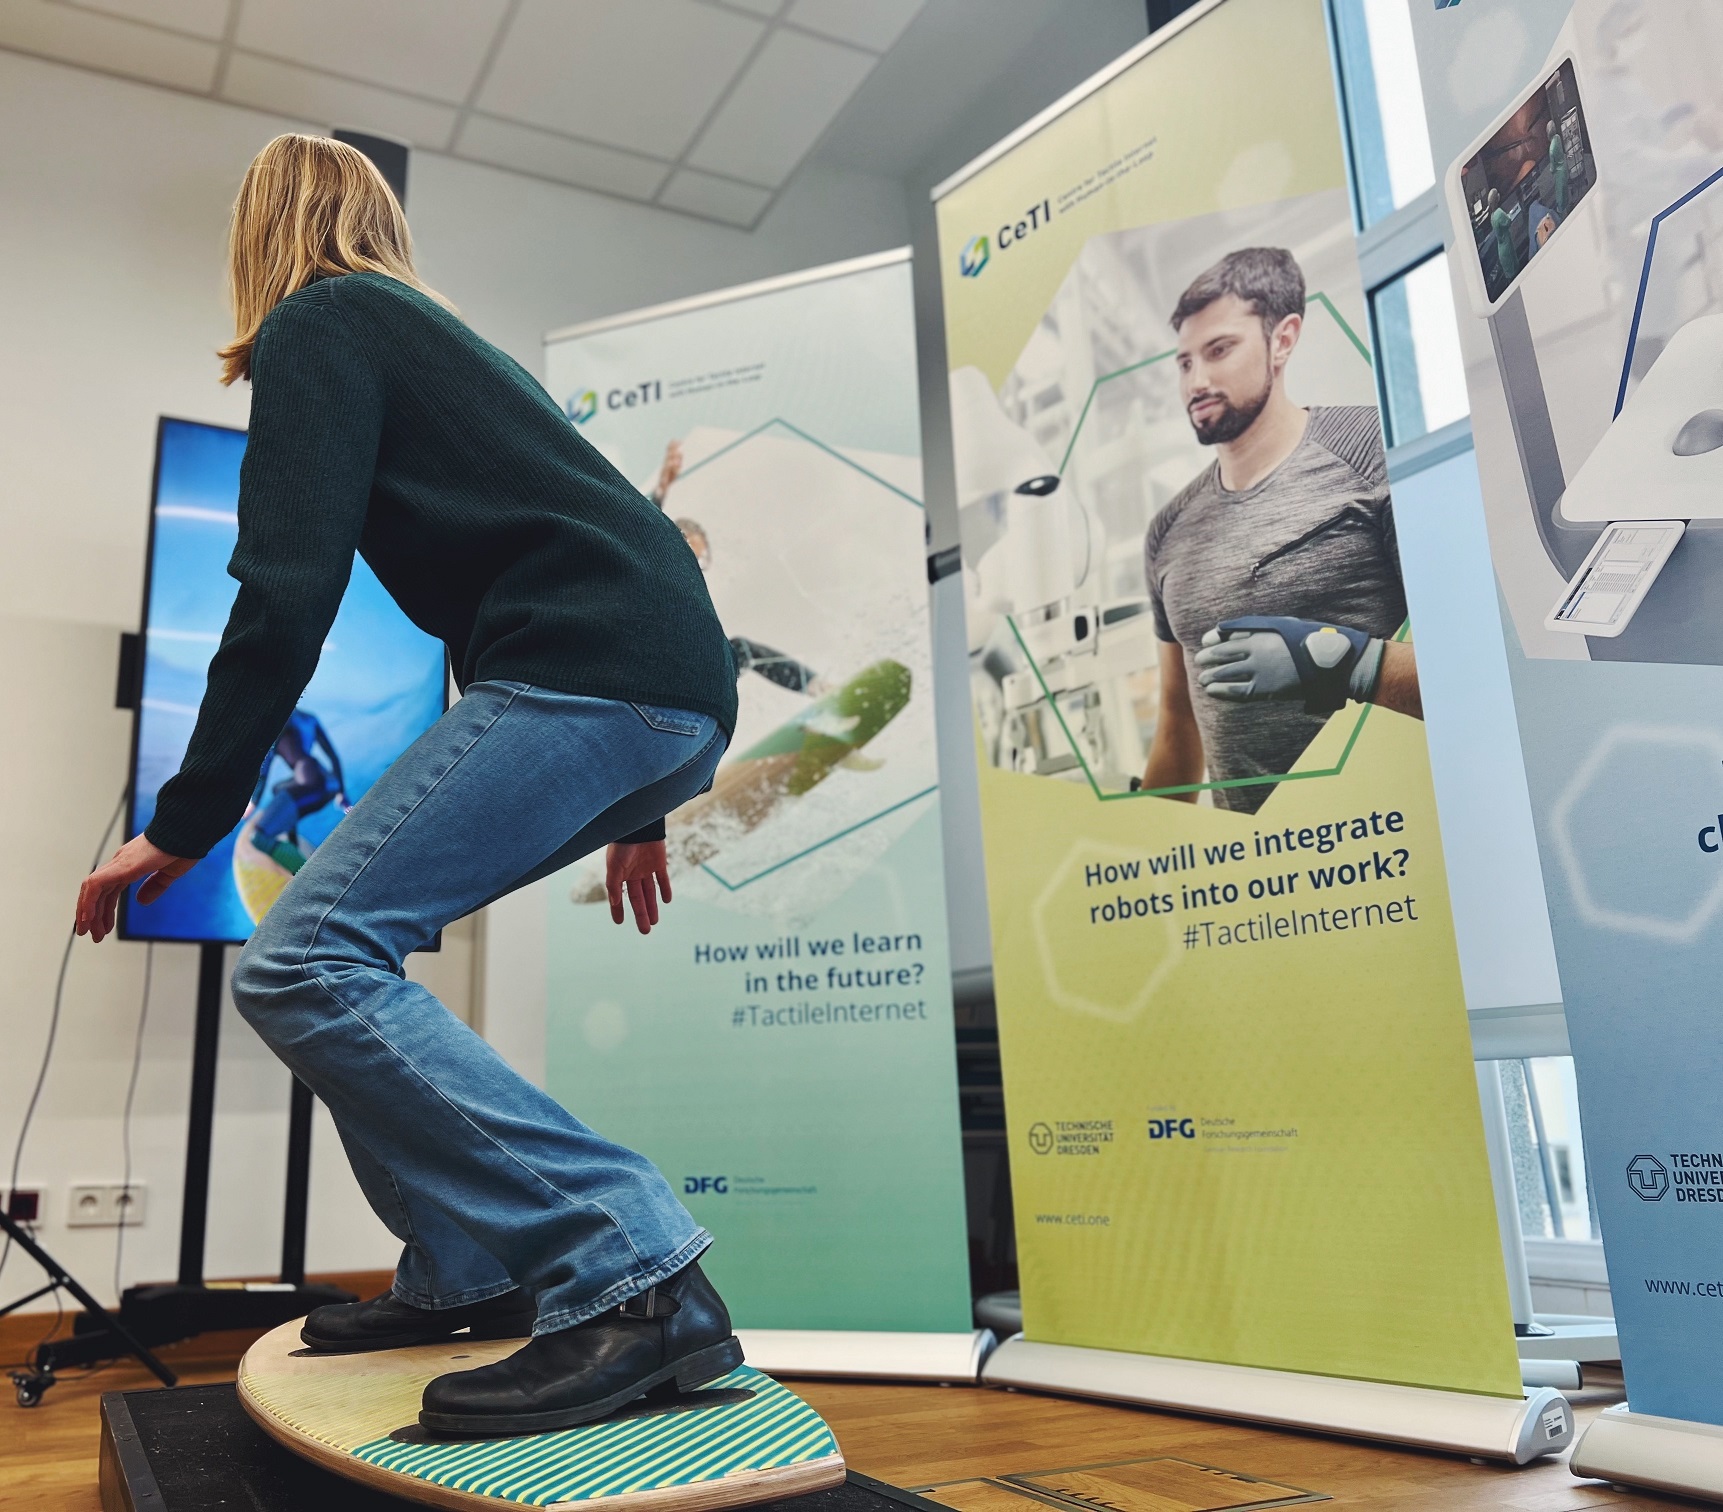 Photograph of a person in a room standing on a surfboard with a screen in front of them with a digital avatar copying the movements